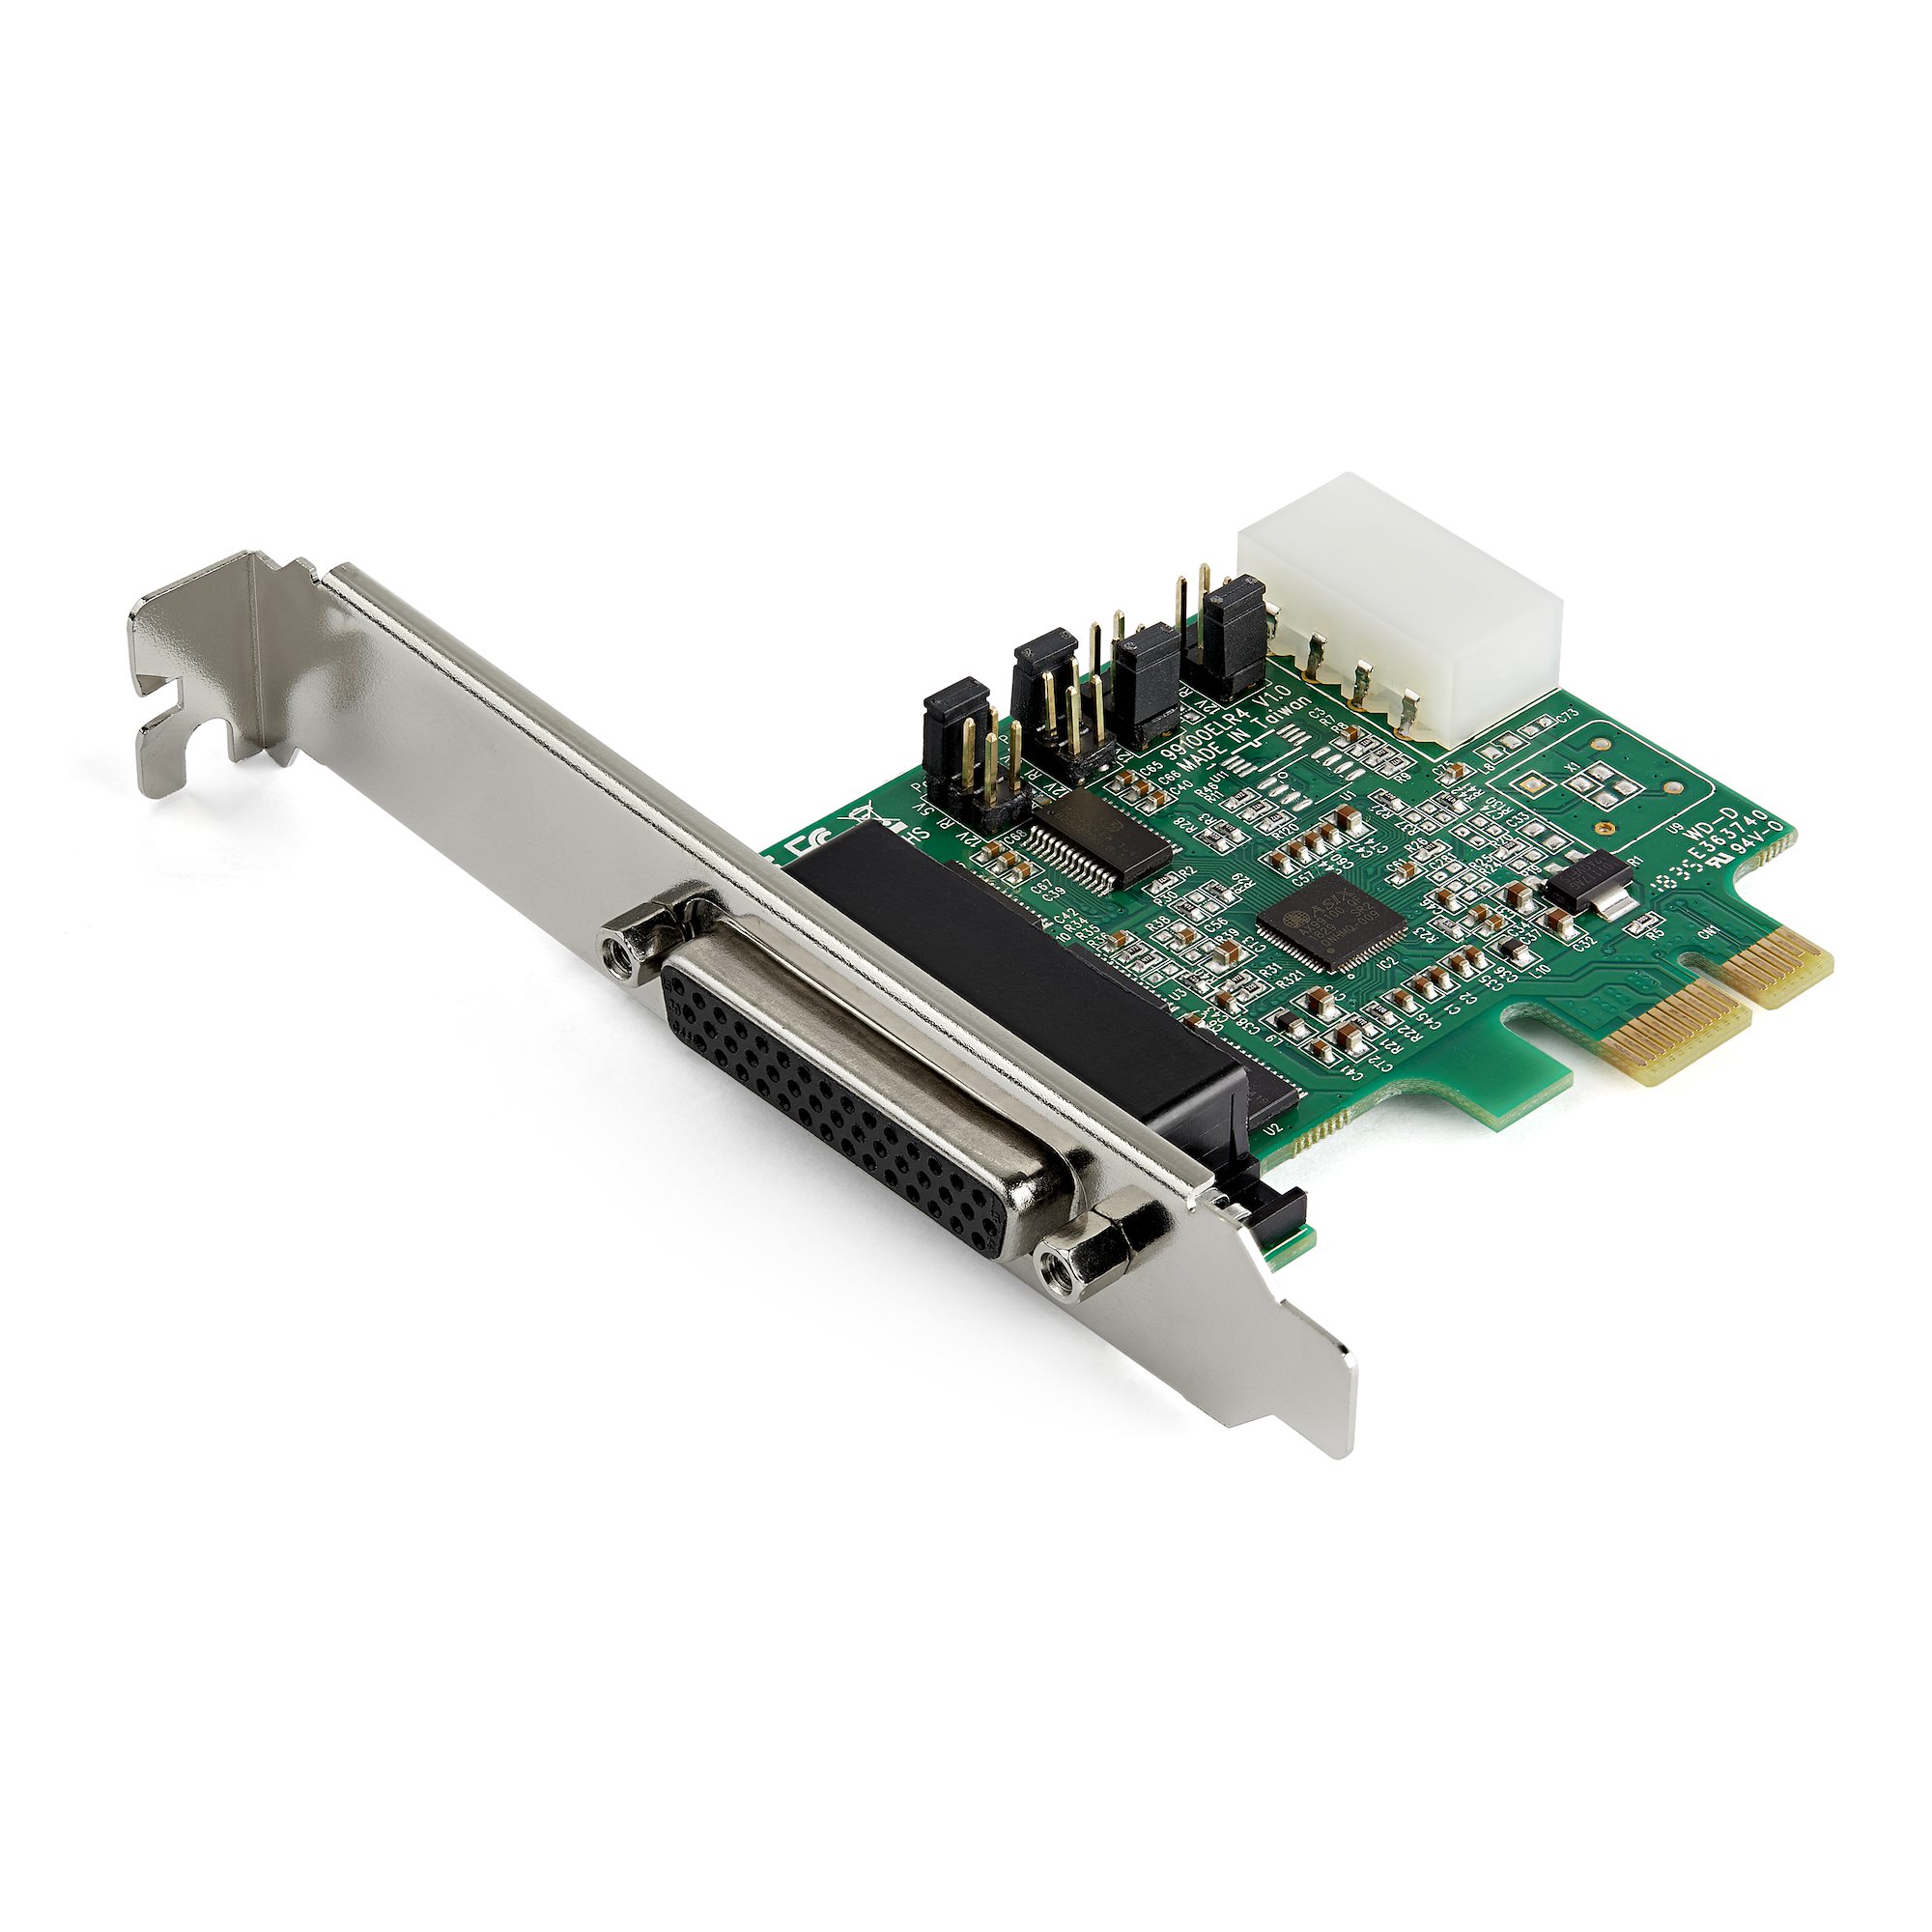 4Port PCIe RS232 Serial DB9 Adapter Card - Serial Cards & Adapters